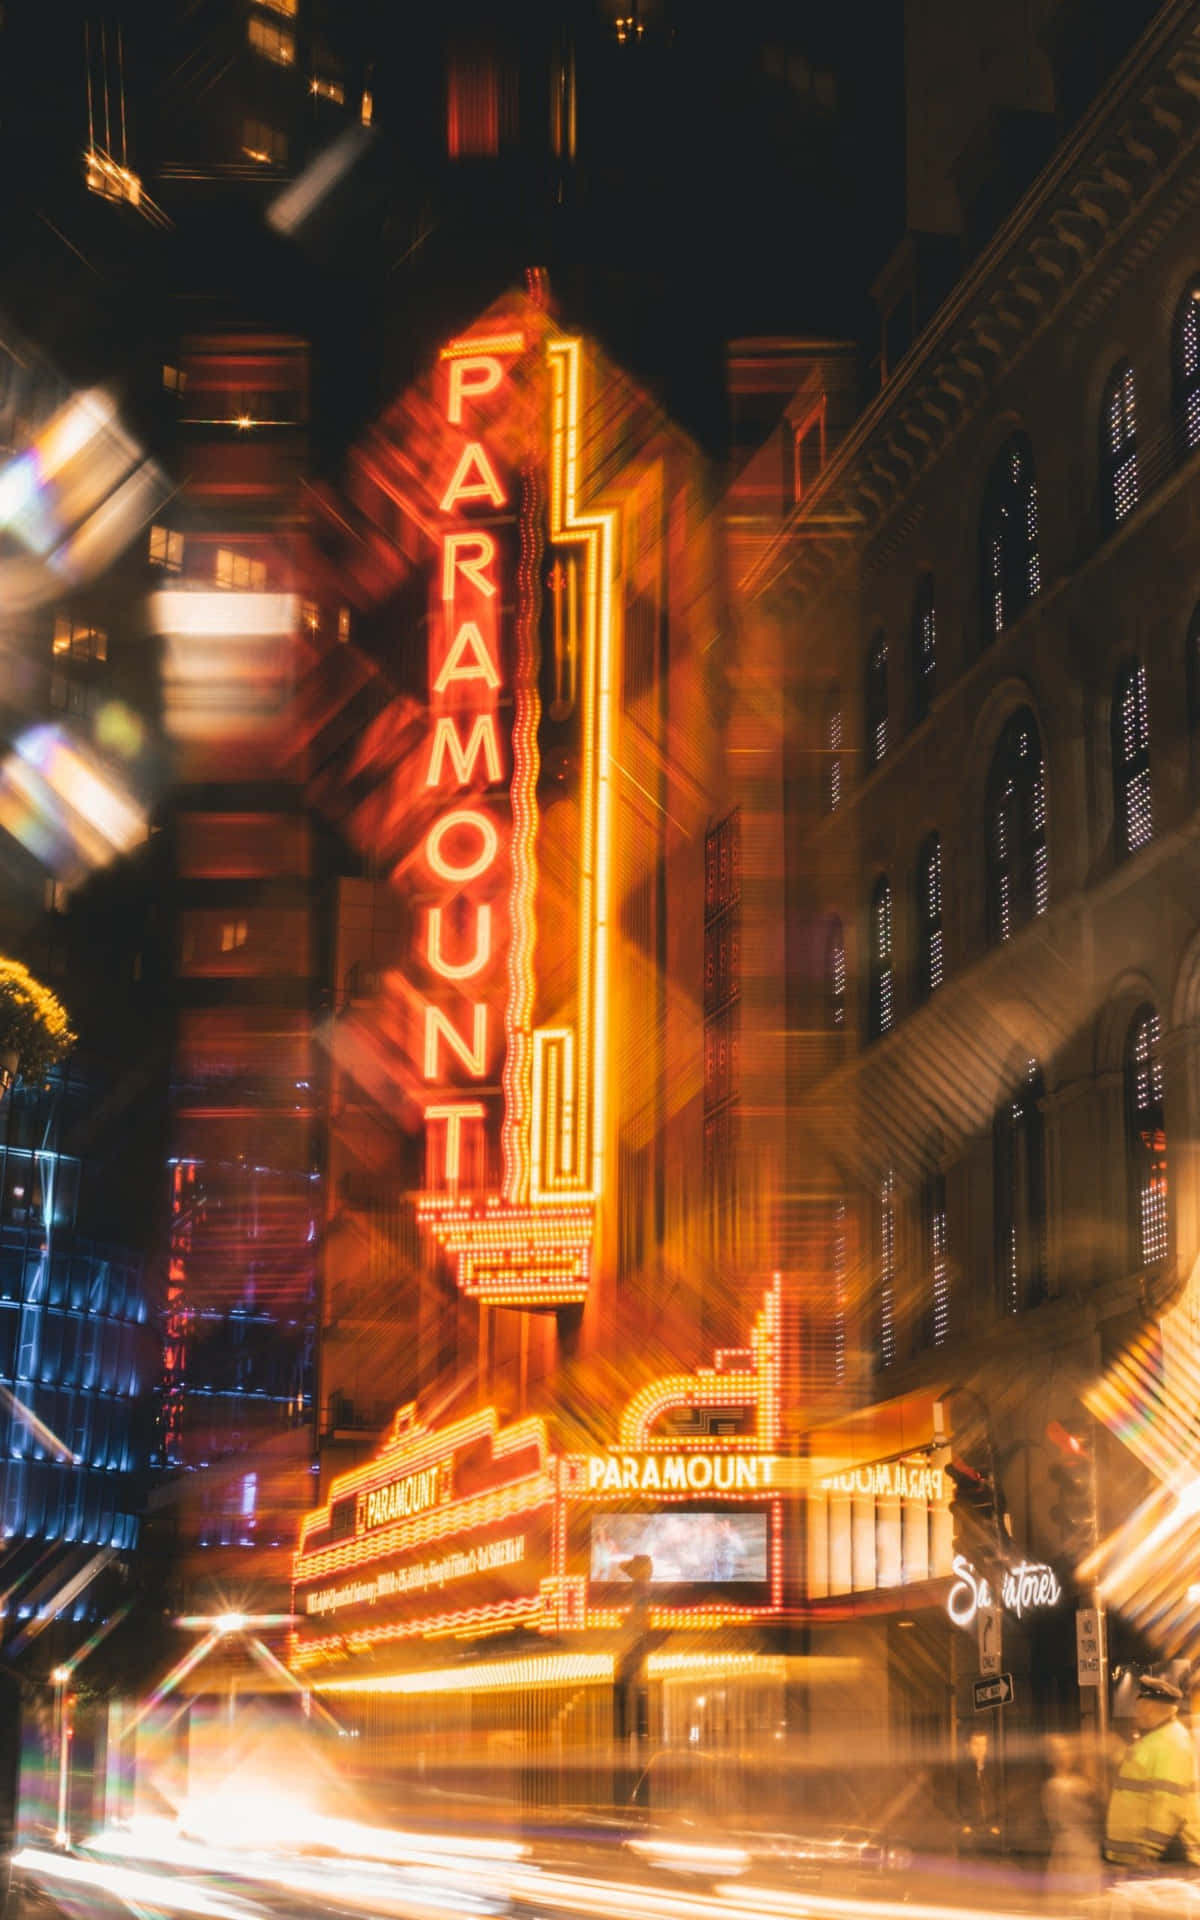 "See the lights of Neon City come alive at night"